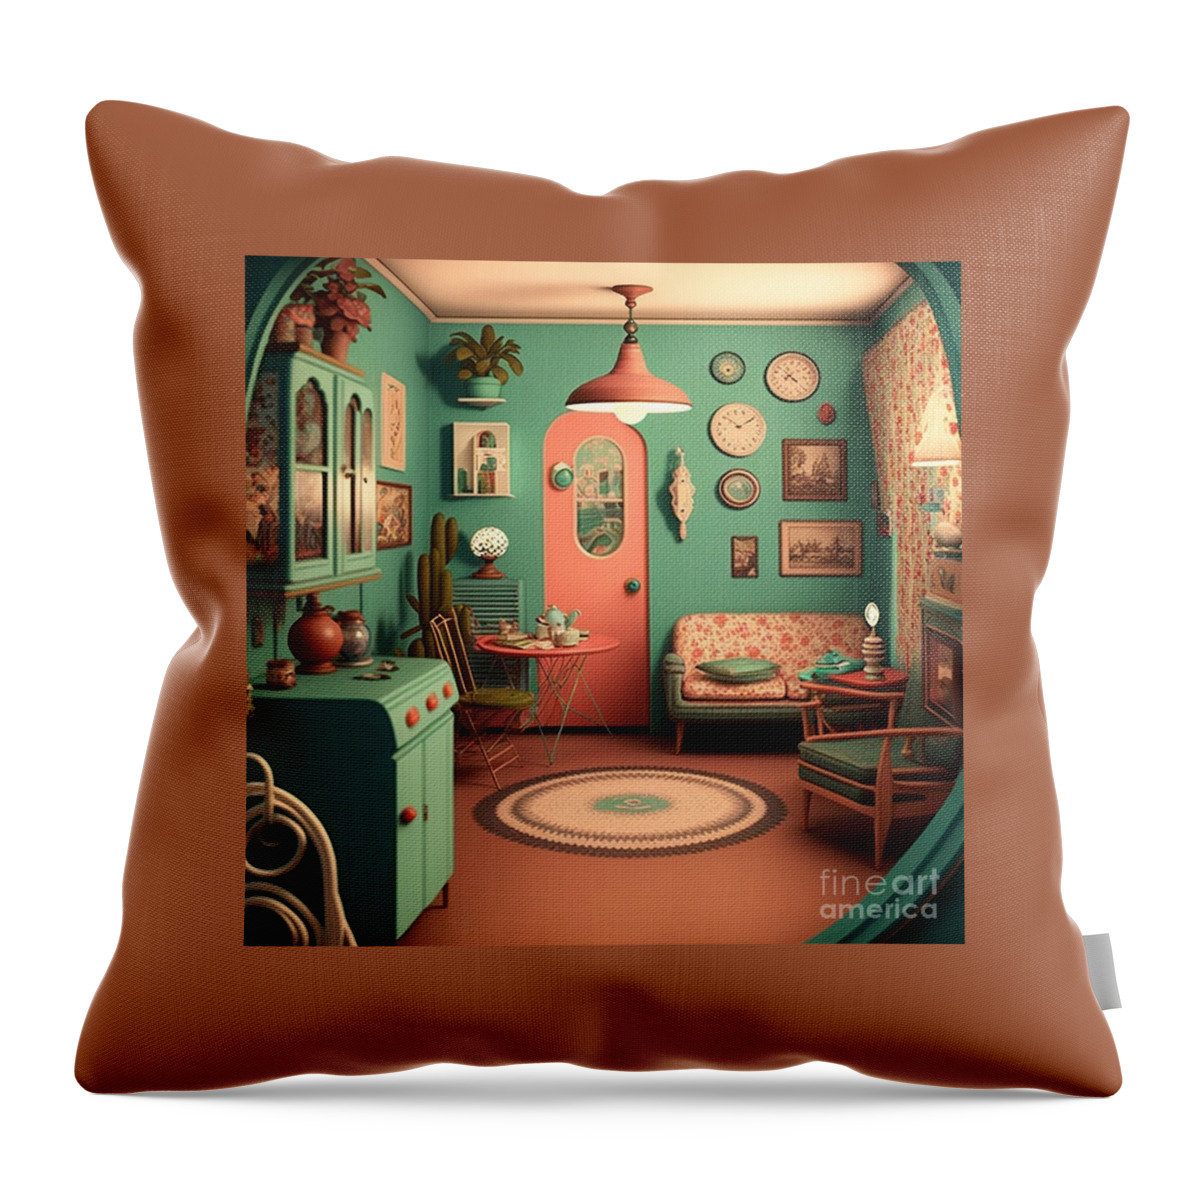 50s Kitsch Throw Pillow featuring the mixed media 50s Kitsch by Jay Schankman